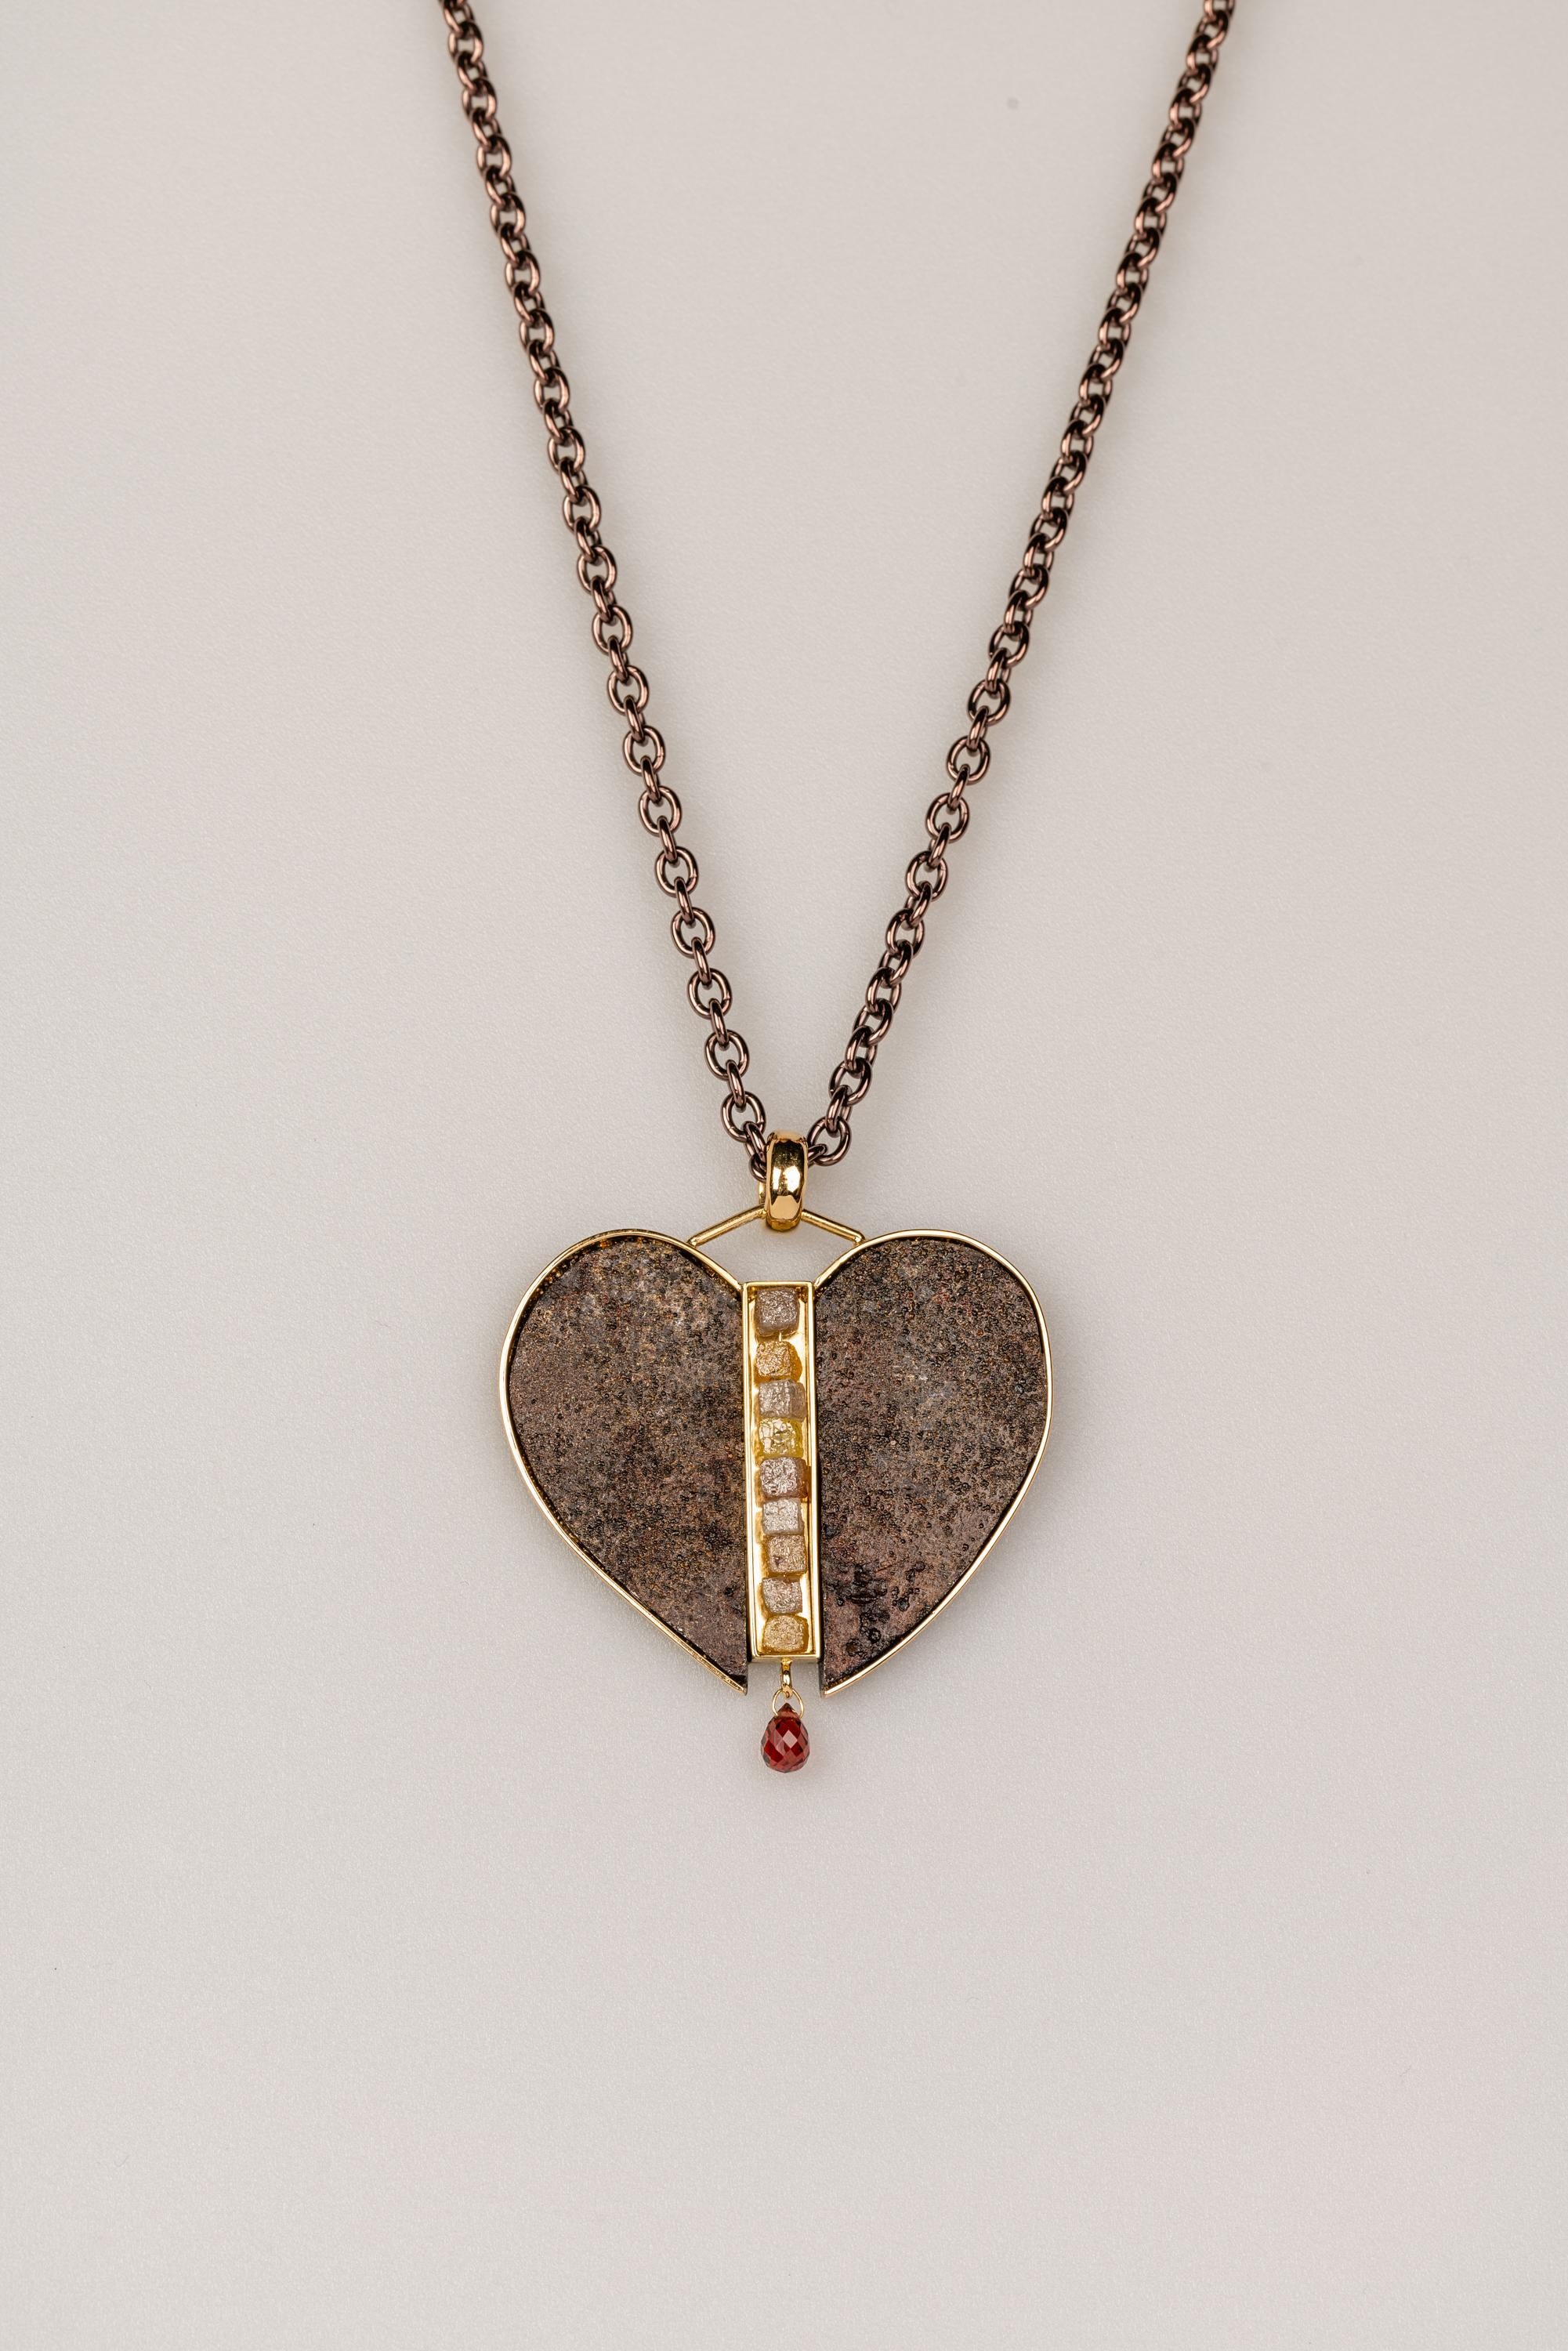 Contemporary 18 Karat Sterling Silver and Rusted Iron Heart Necklace with Garnet and Diamonds